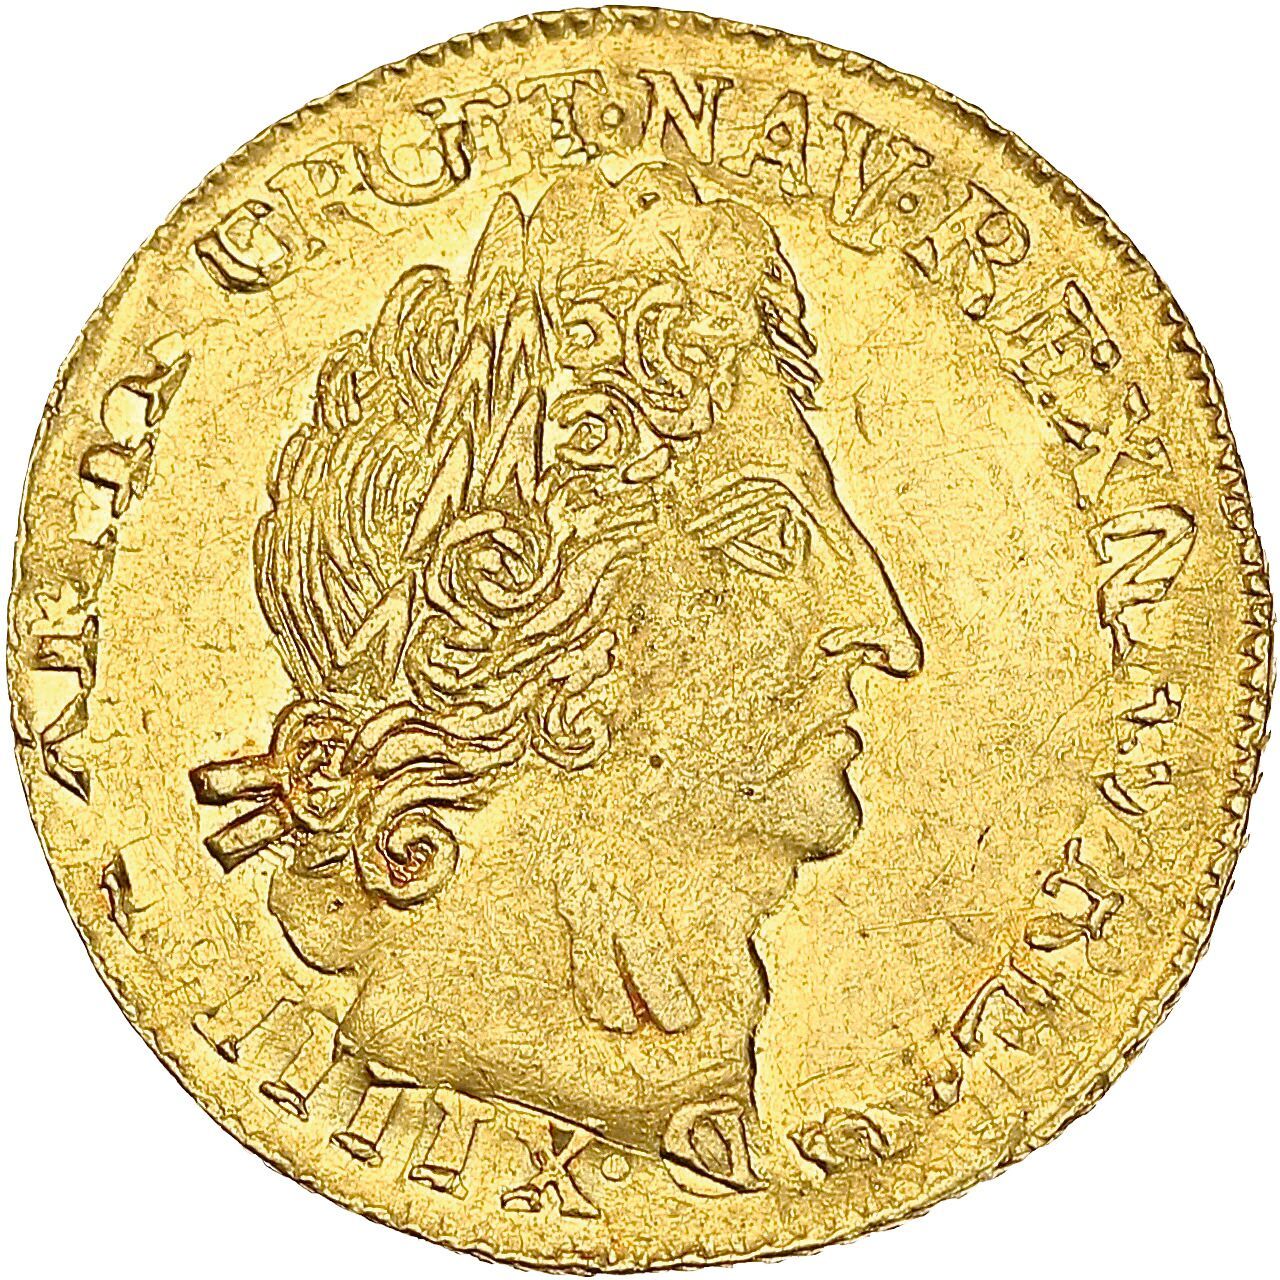 Null LOUIS XIV (1643-1715)
Louis d'or aux insignes (Goldener Ludwig mit Insignie&hellip;